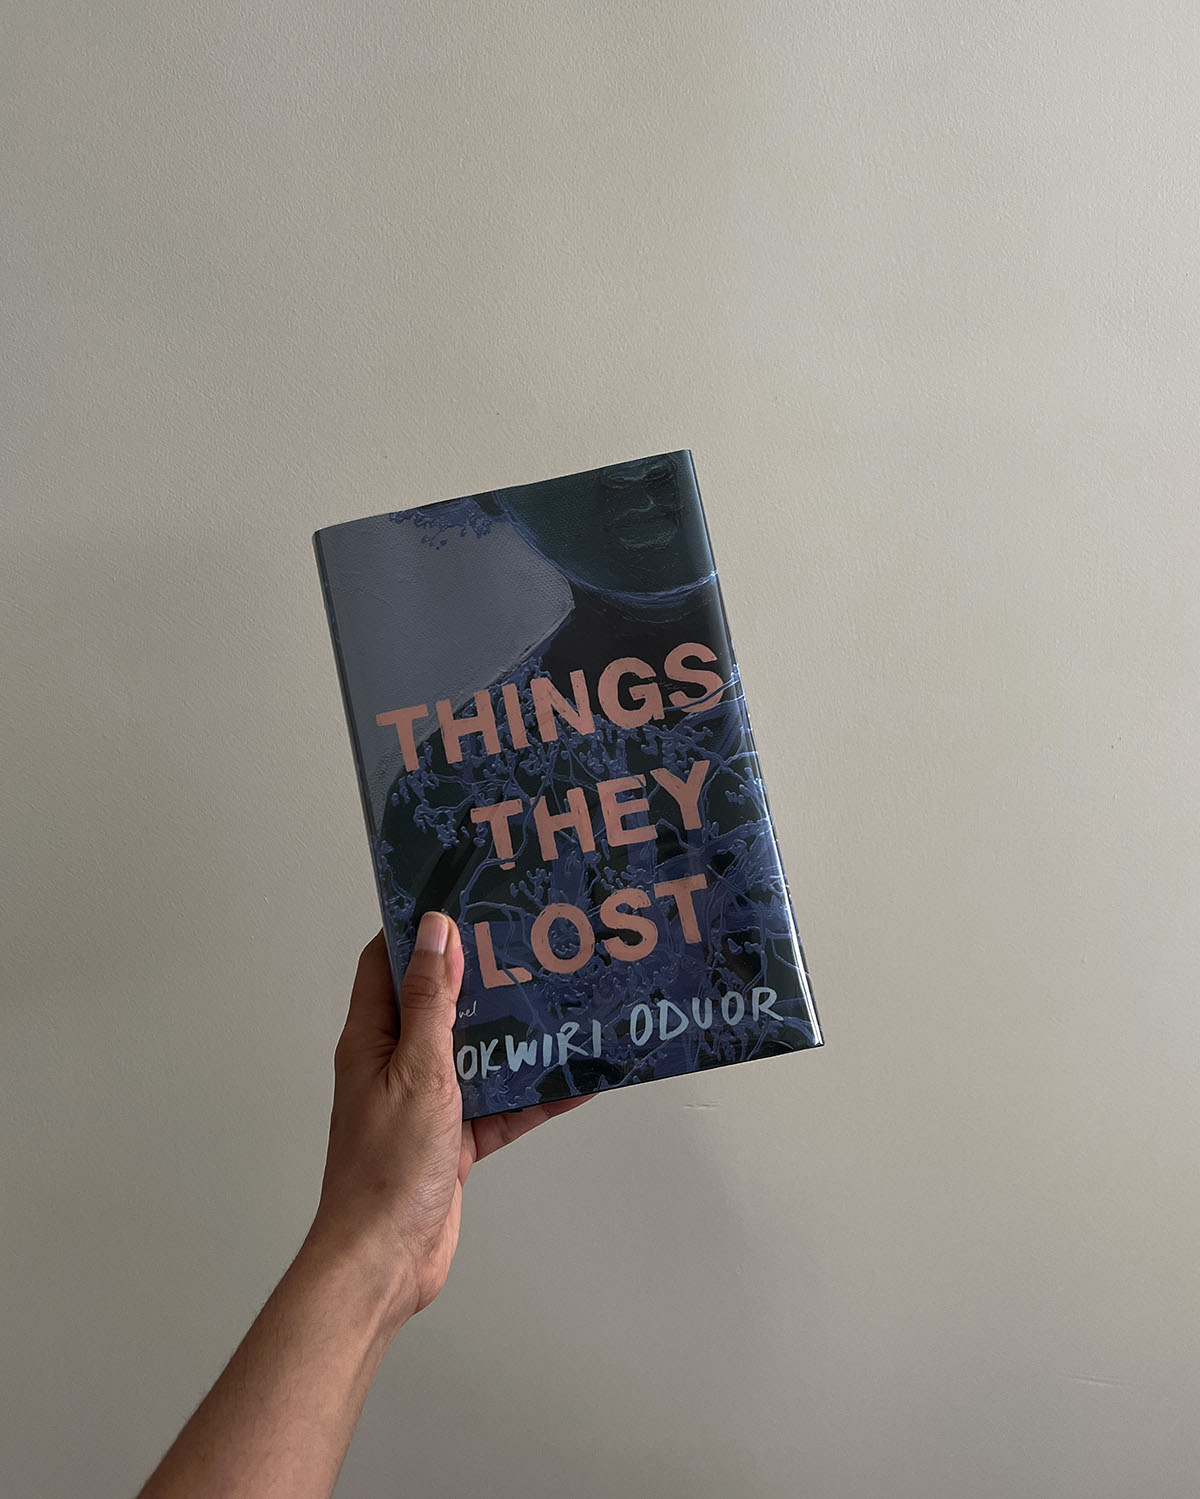 Review: Lost things from Okwiri Oduor